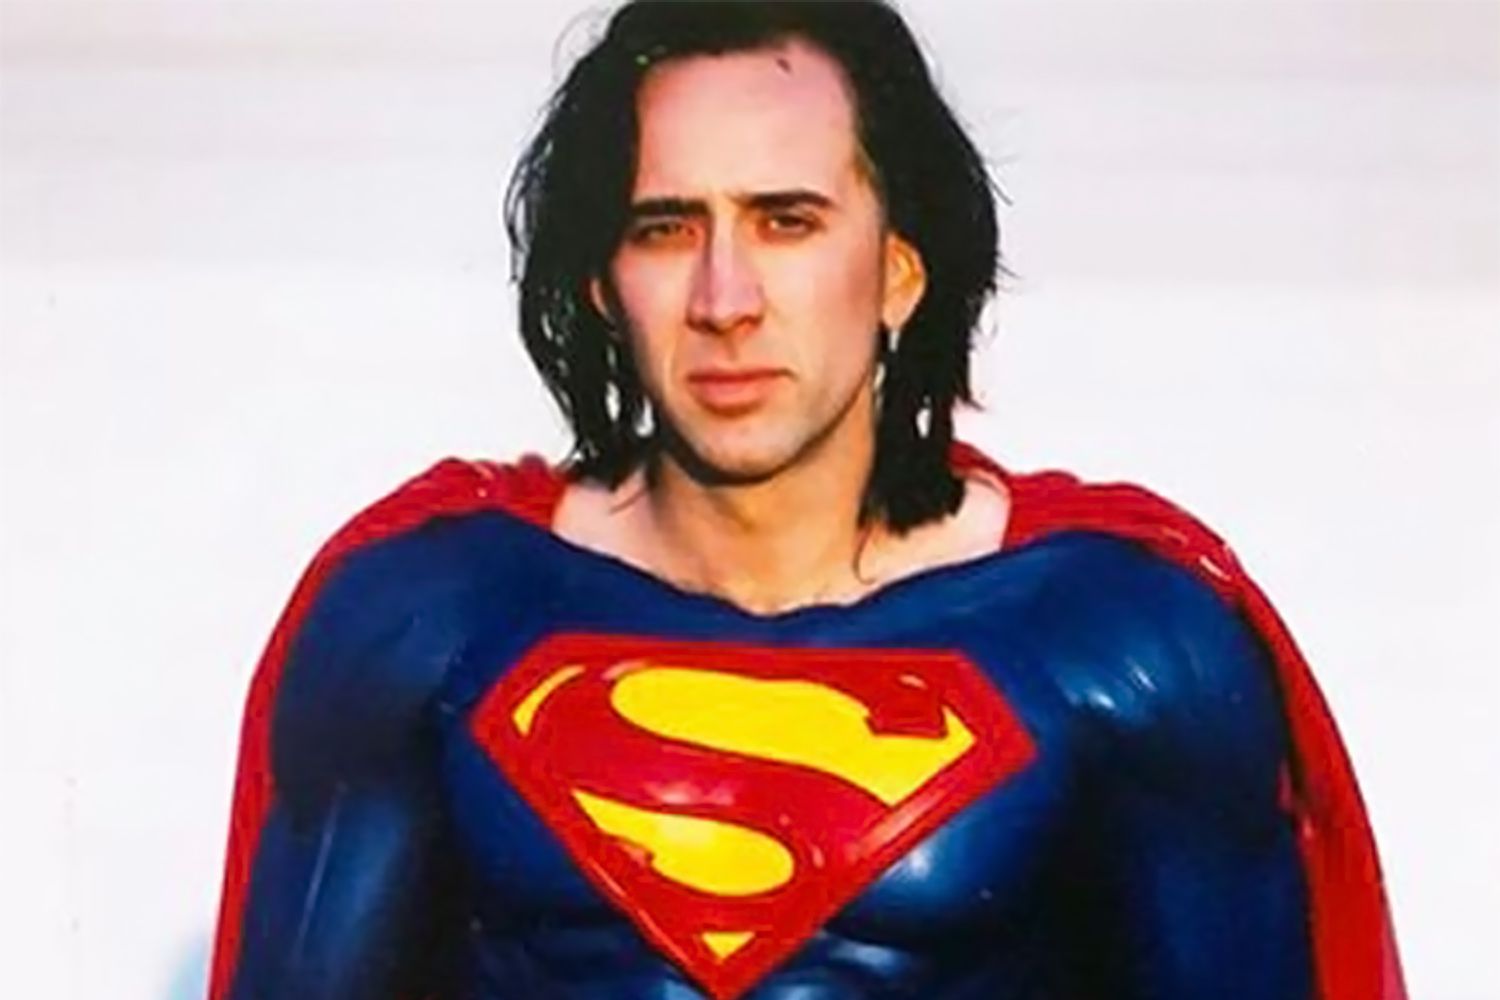 Nic Cage as Superman